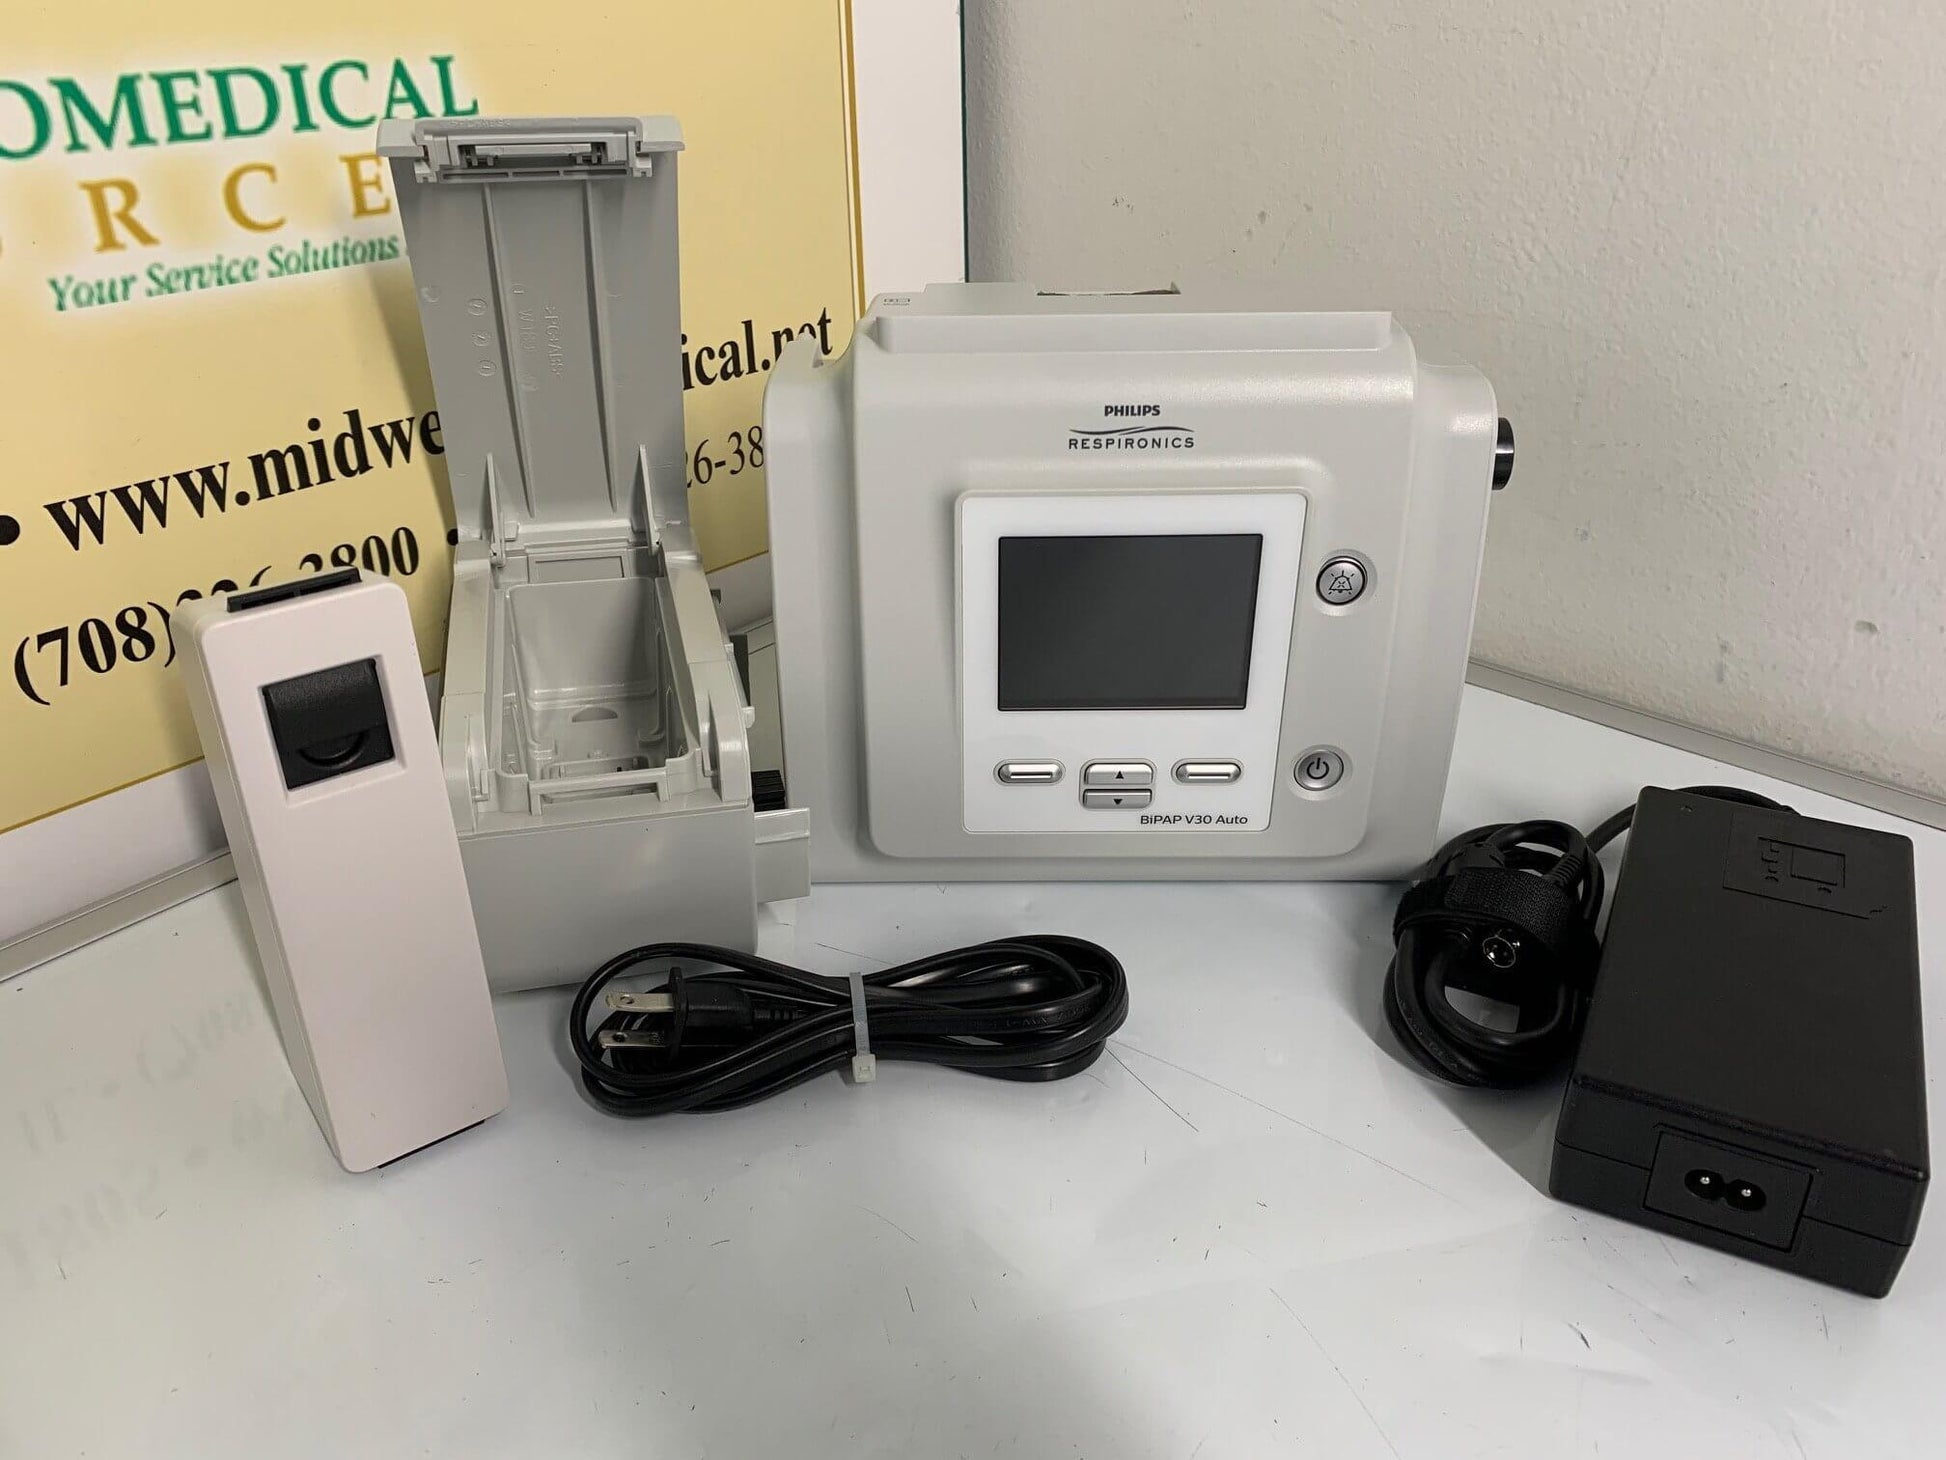 REFURBISHED Philips Respironics BiPAP V30 Auto 1111155 with Warranty & Free  Shipping